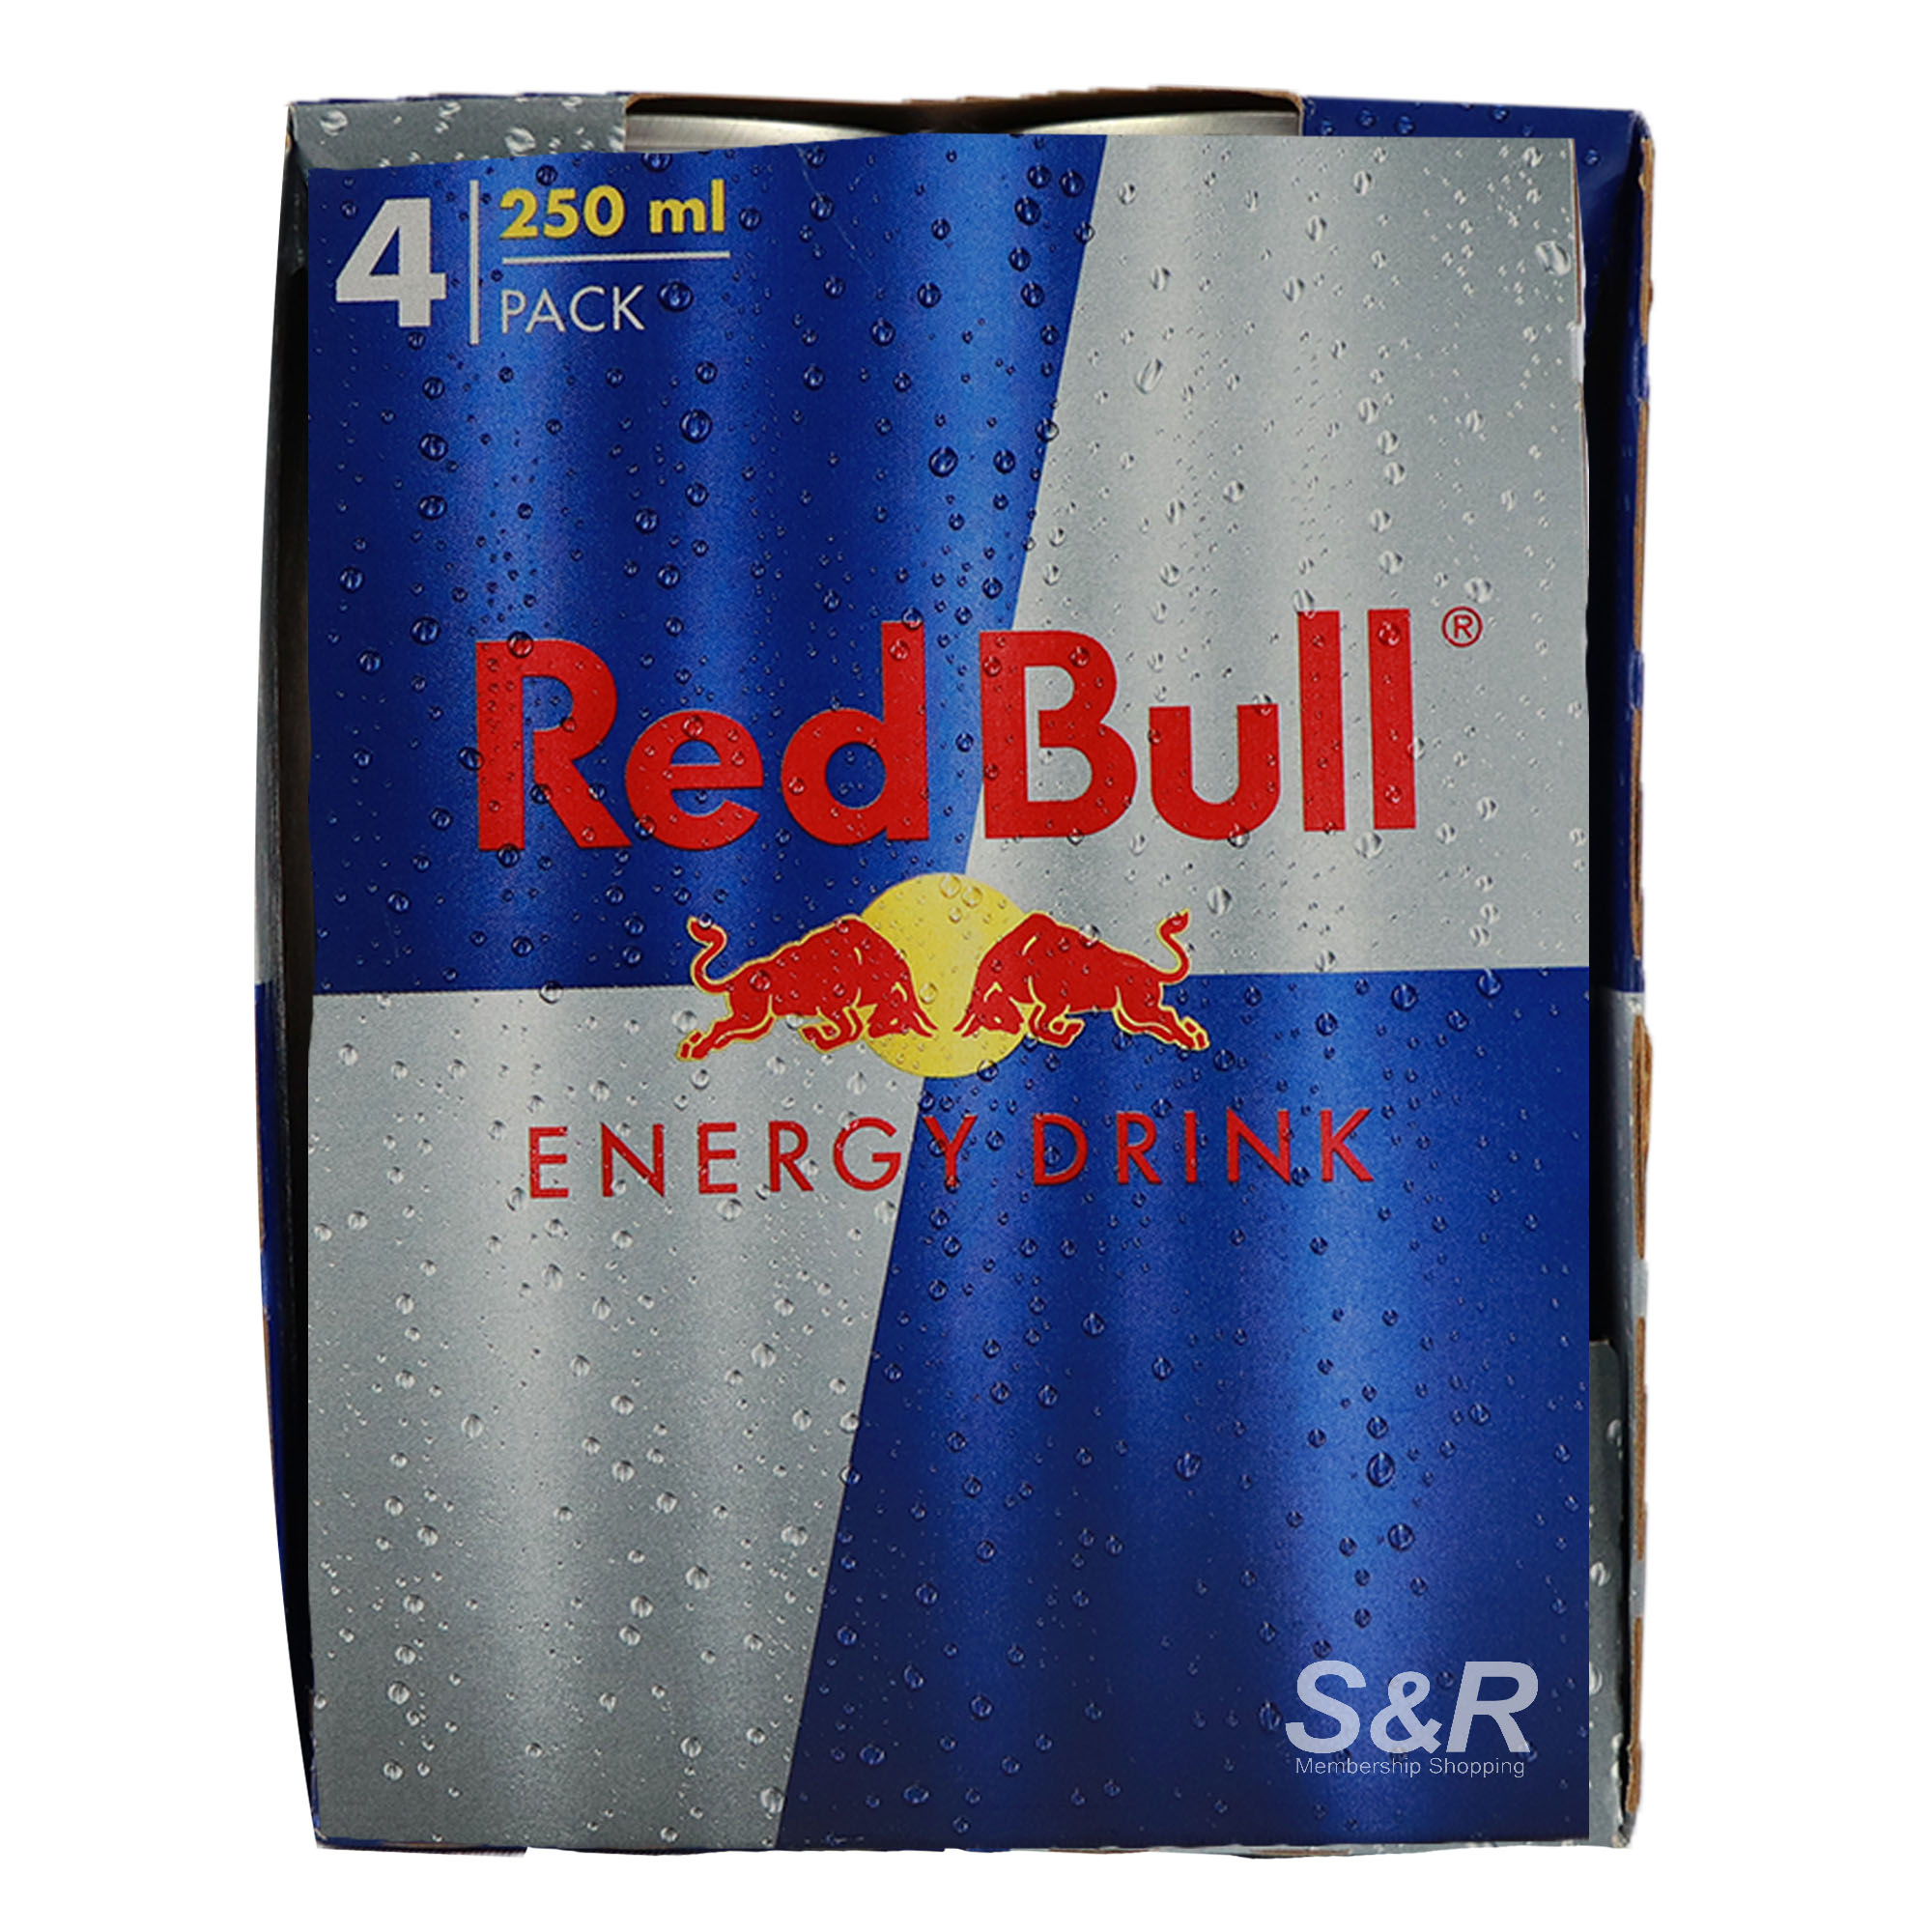 Red Bull Energy Drink 4 cans